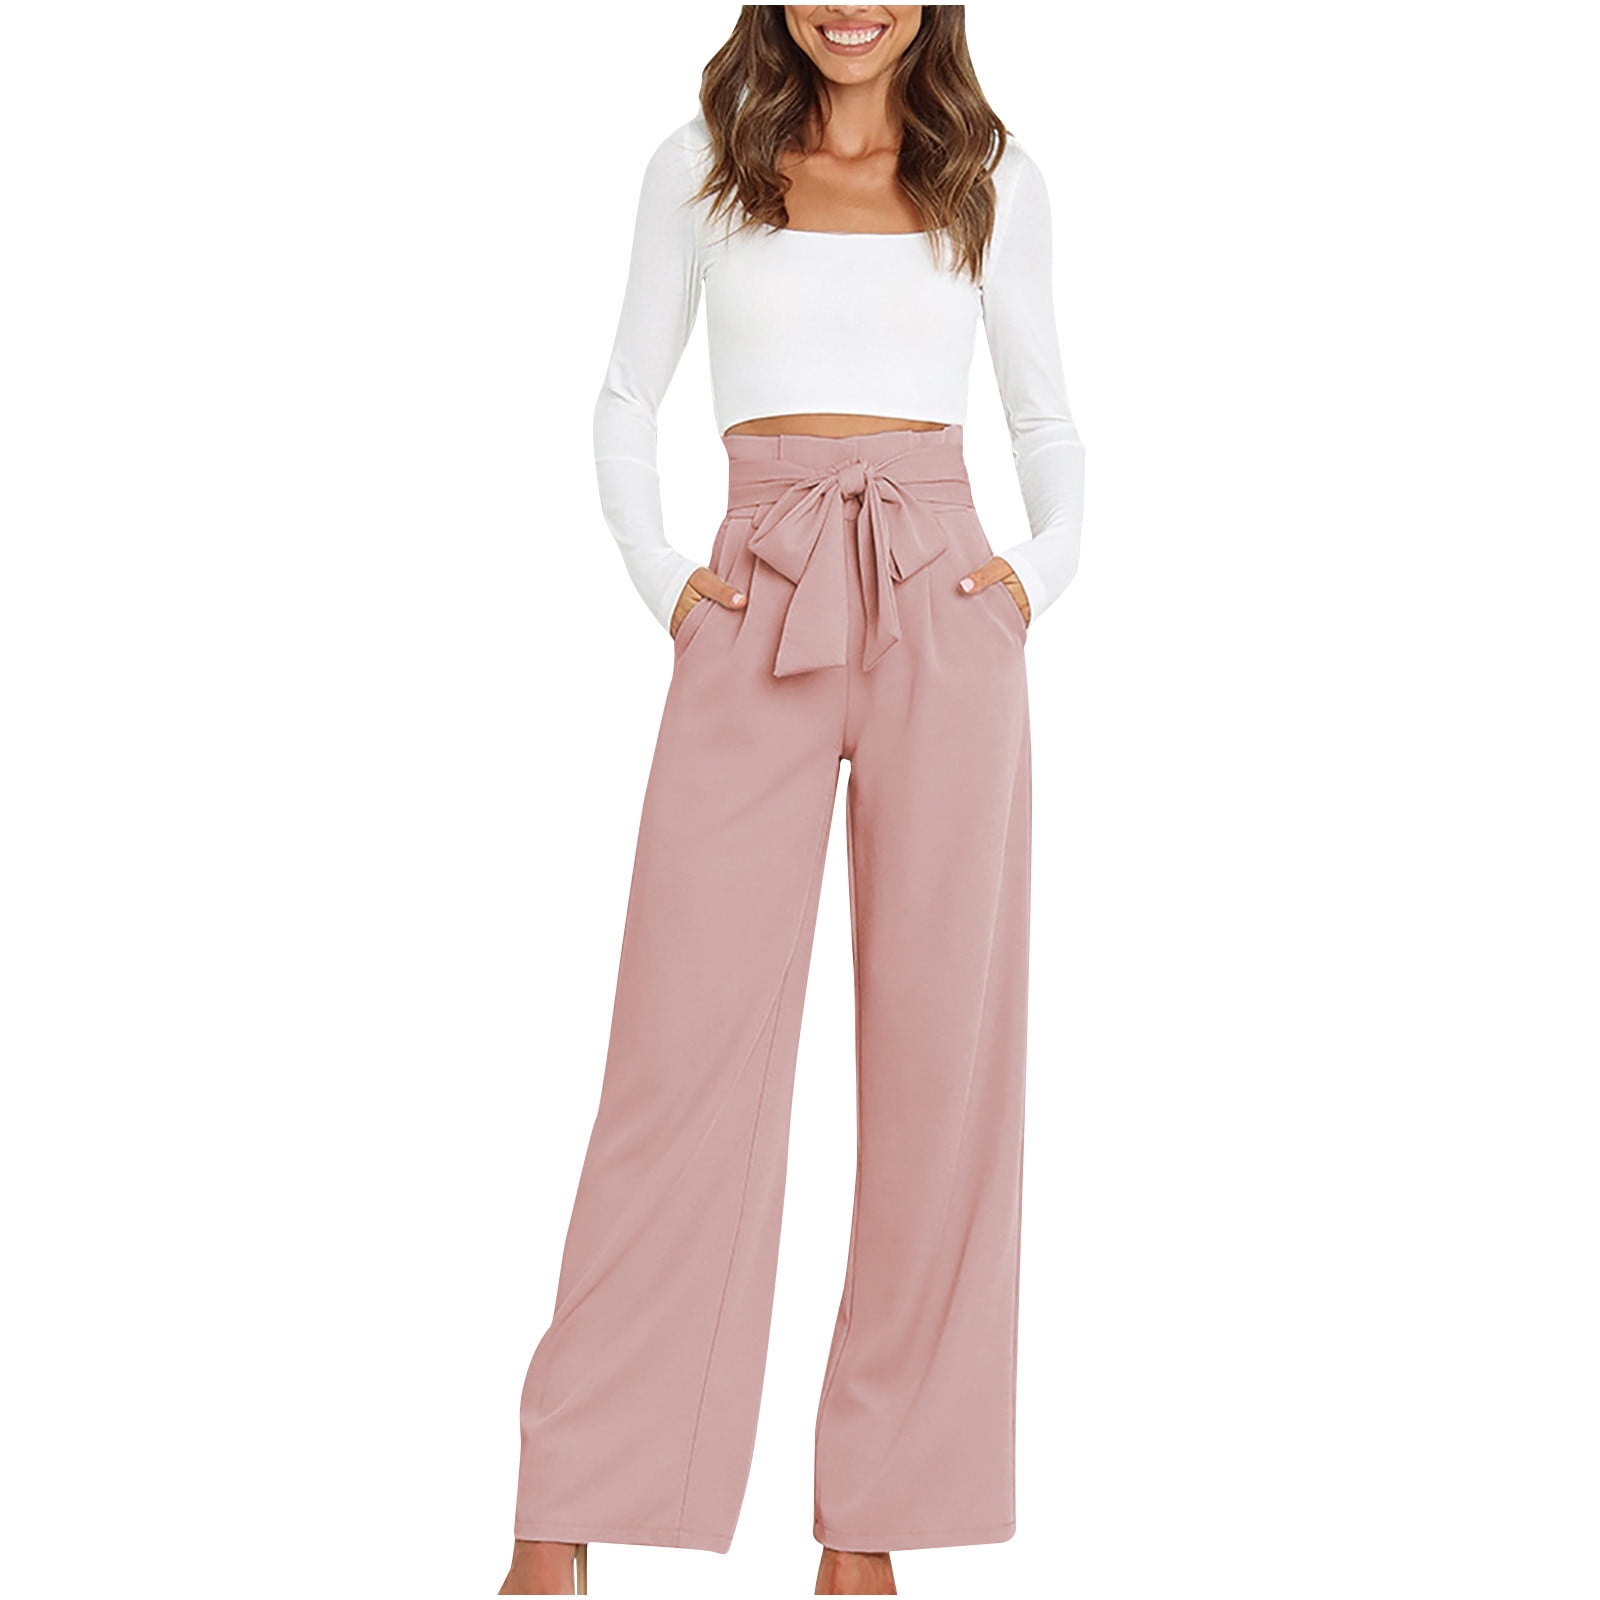 RYRJJ Straight Wide Leg Long Trousers with Tie Belt for Women Pleated Front High  Waisted Business Work Pants Elegant Dress Trousers(Pink,XXL) 